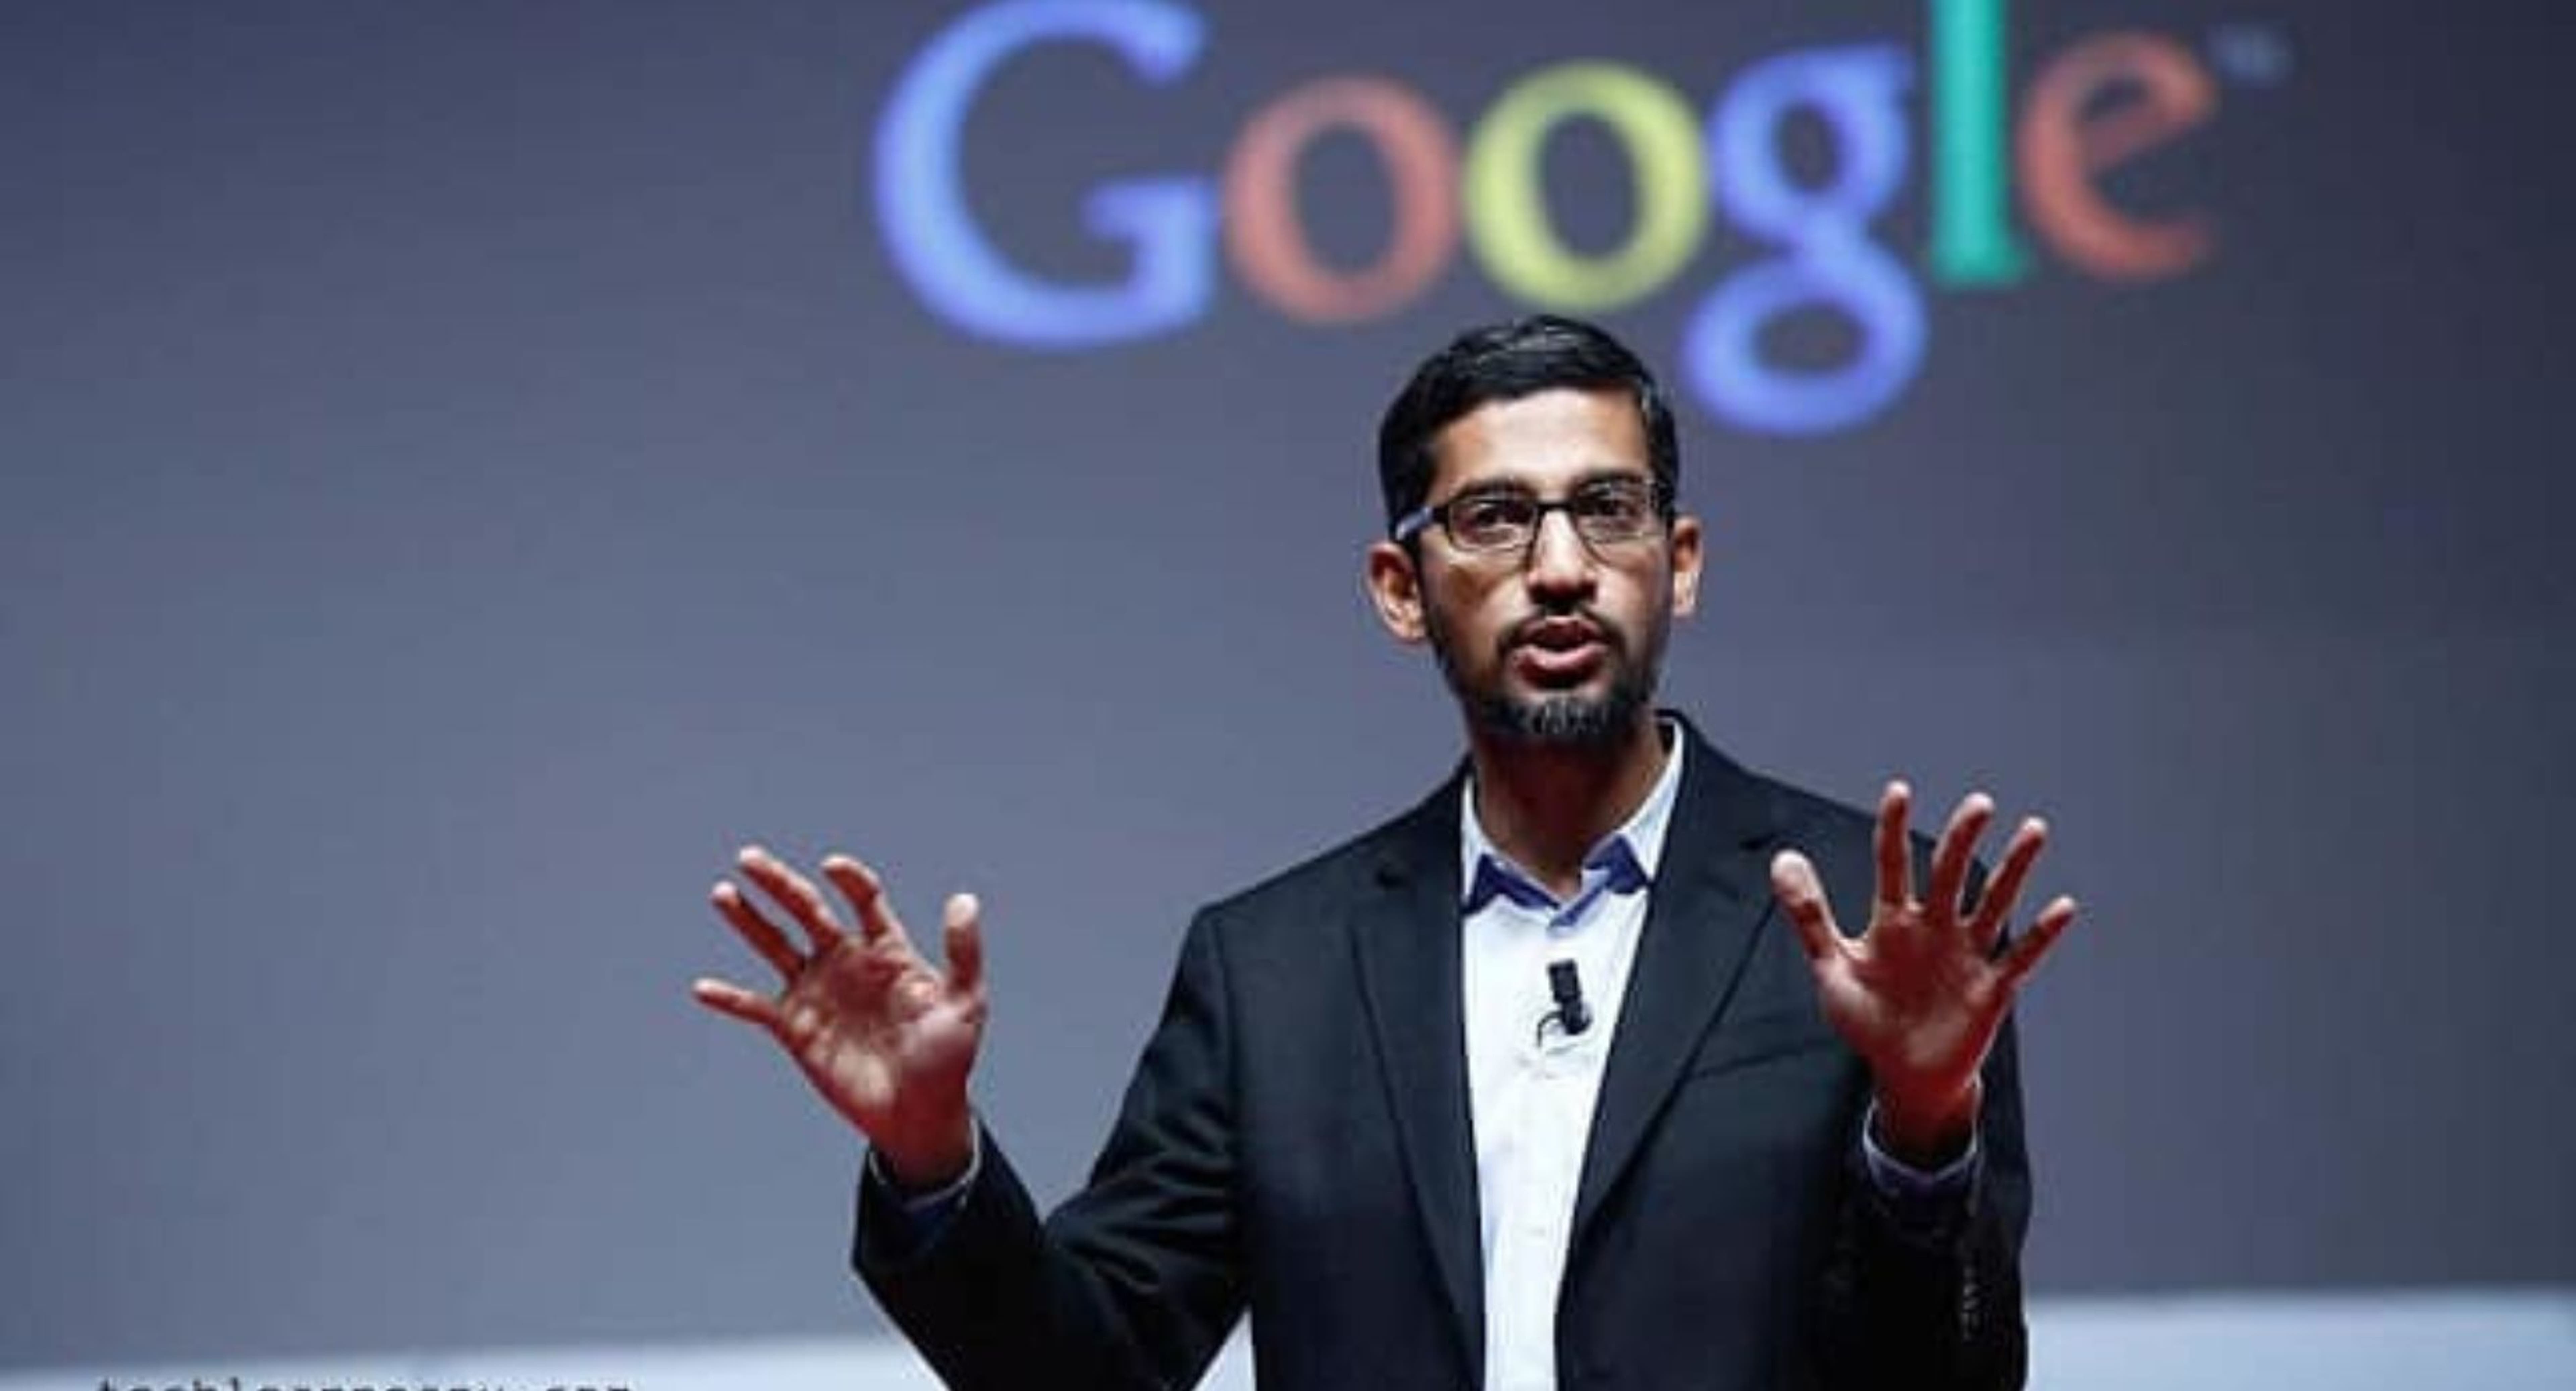 Google Executives Threaten Workers With Layoffs, Say &#39;There Will Be Blood On The Streets&#39;: Report